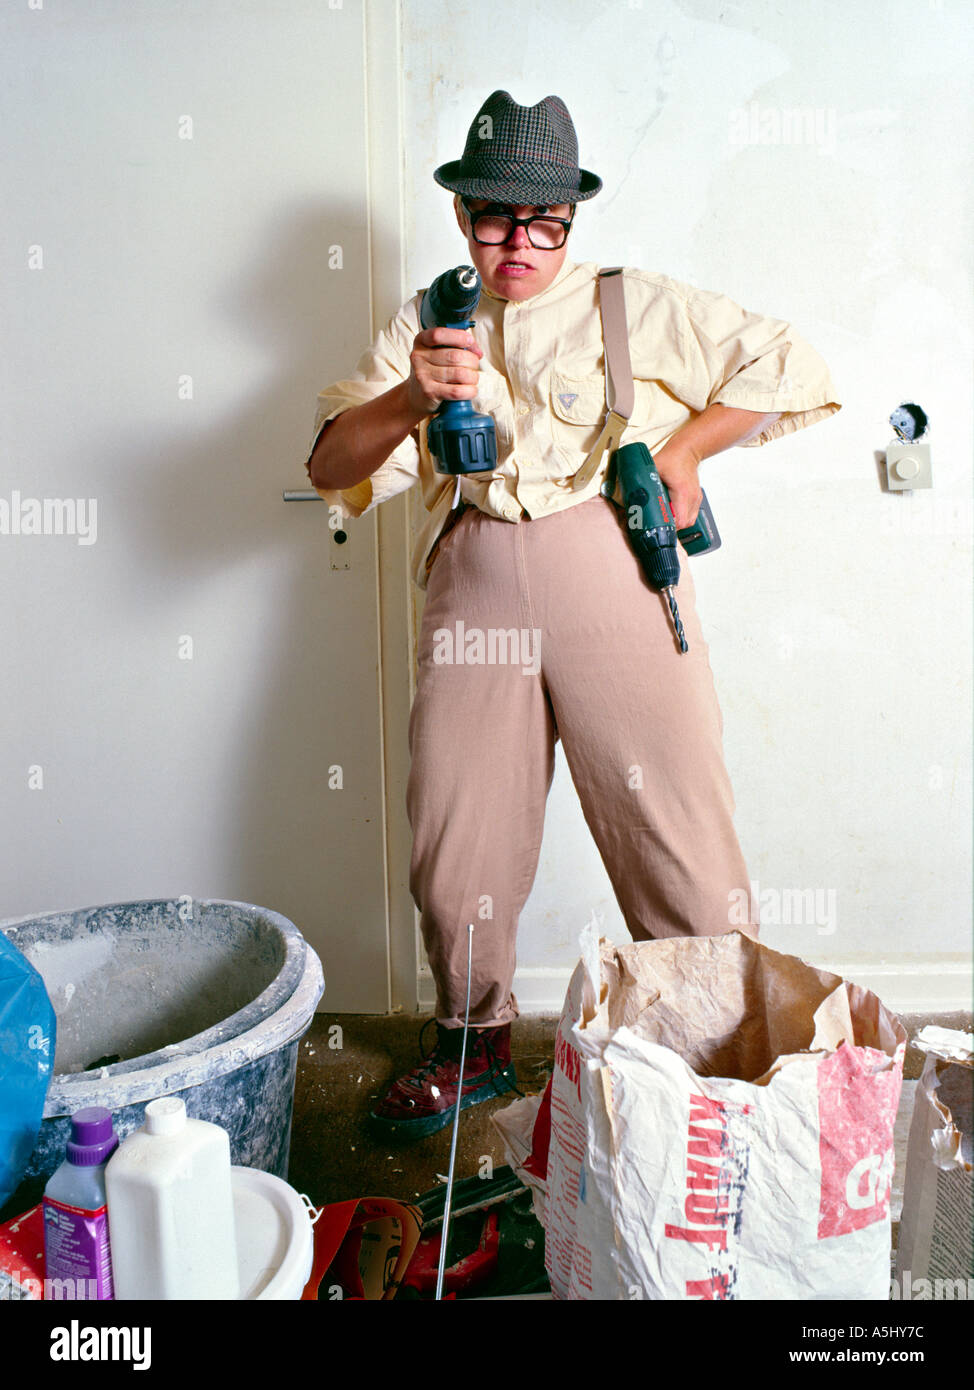 MR PR silly handyman do it yourselfer renovating a flat holding drilling machine like a weapon Stock Photo